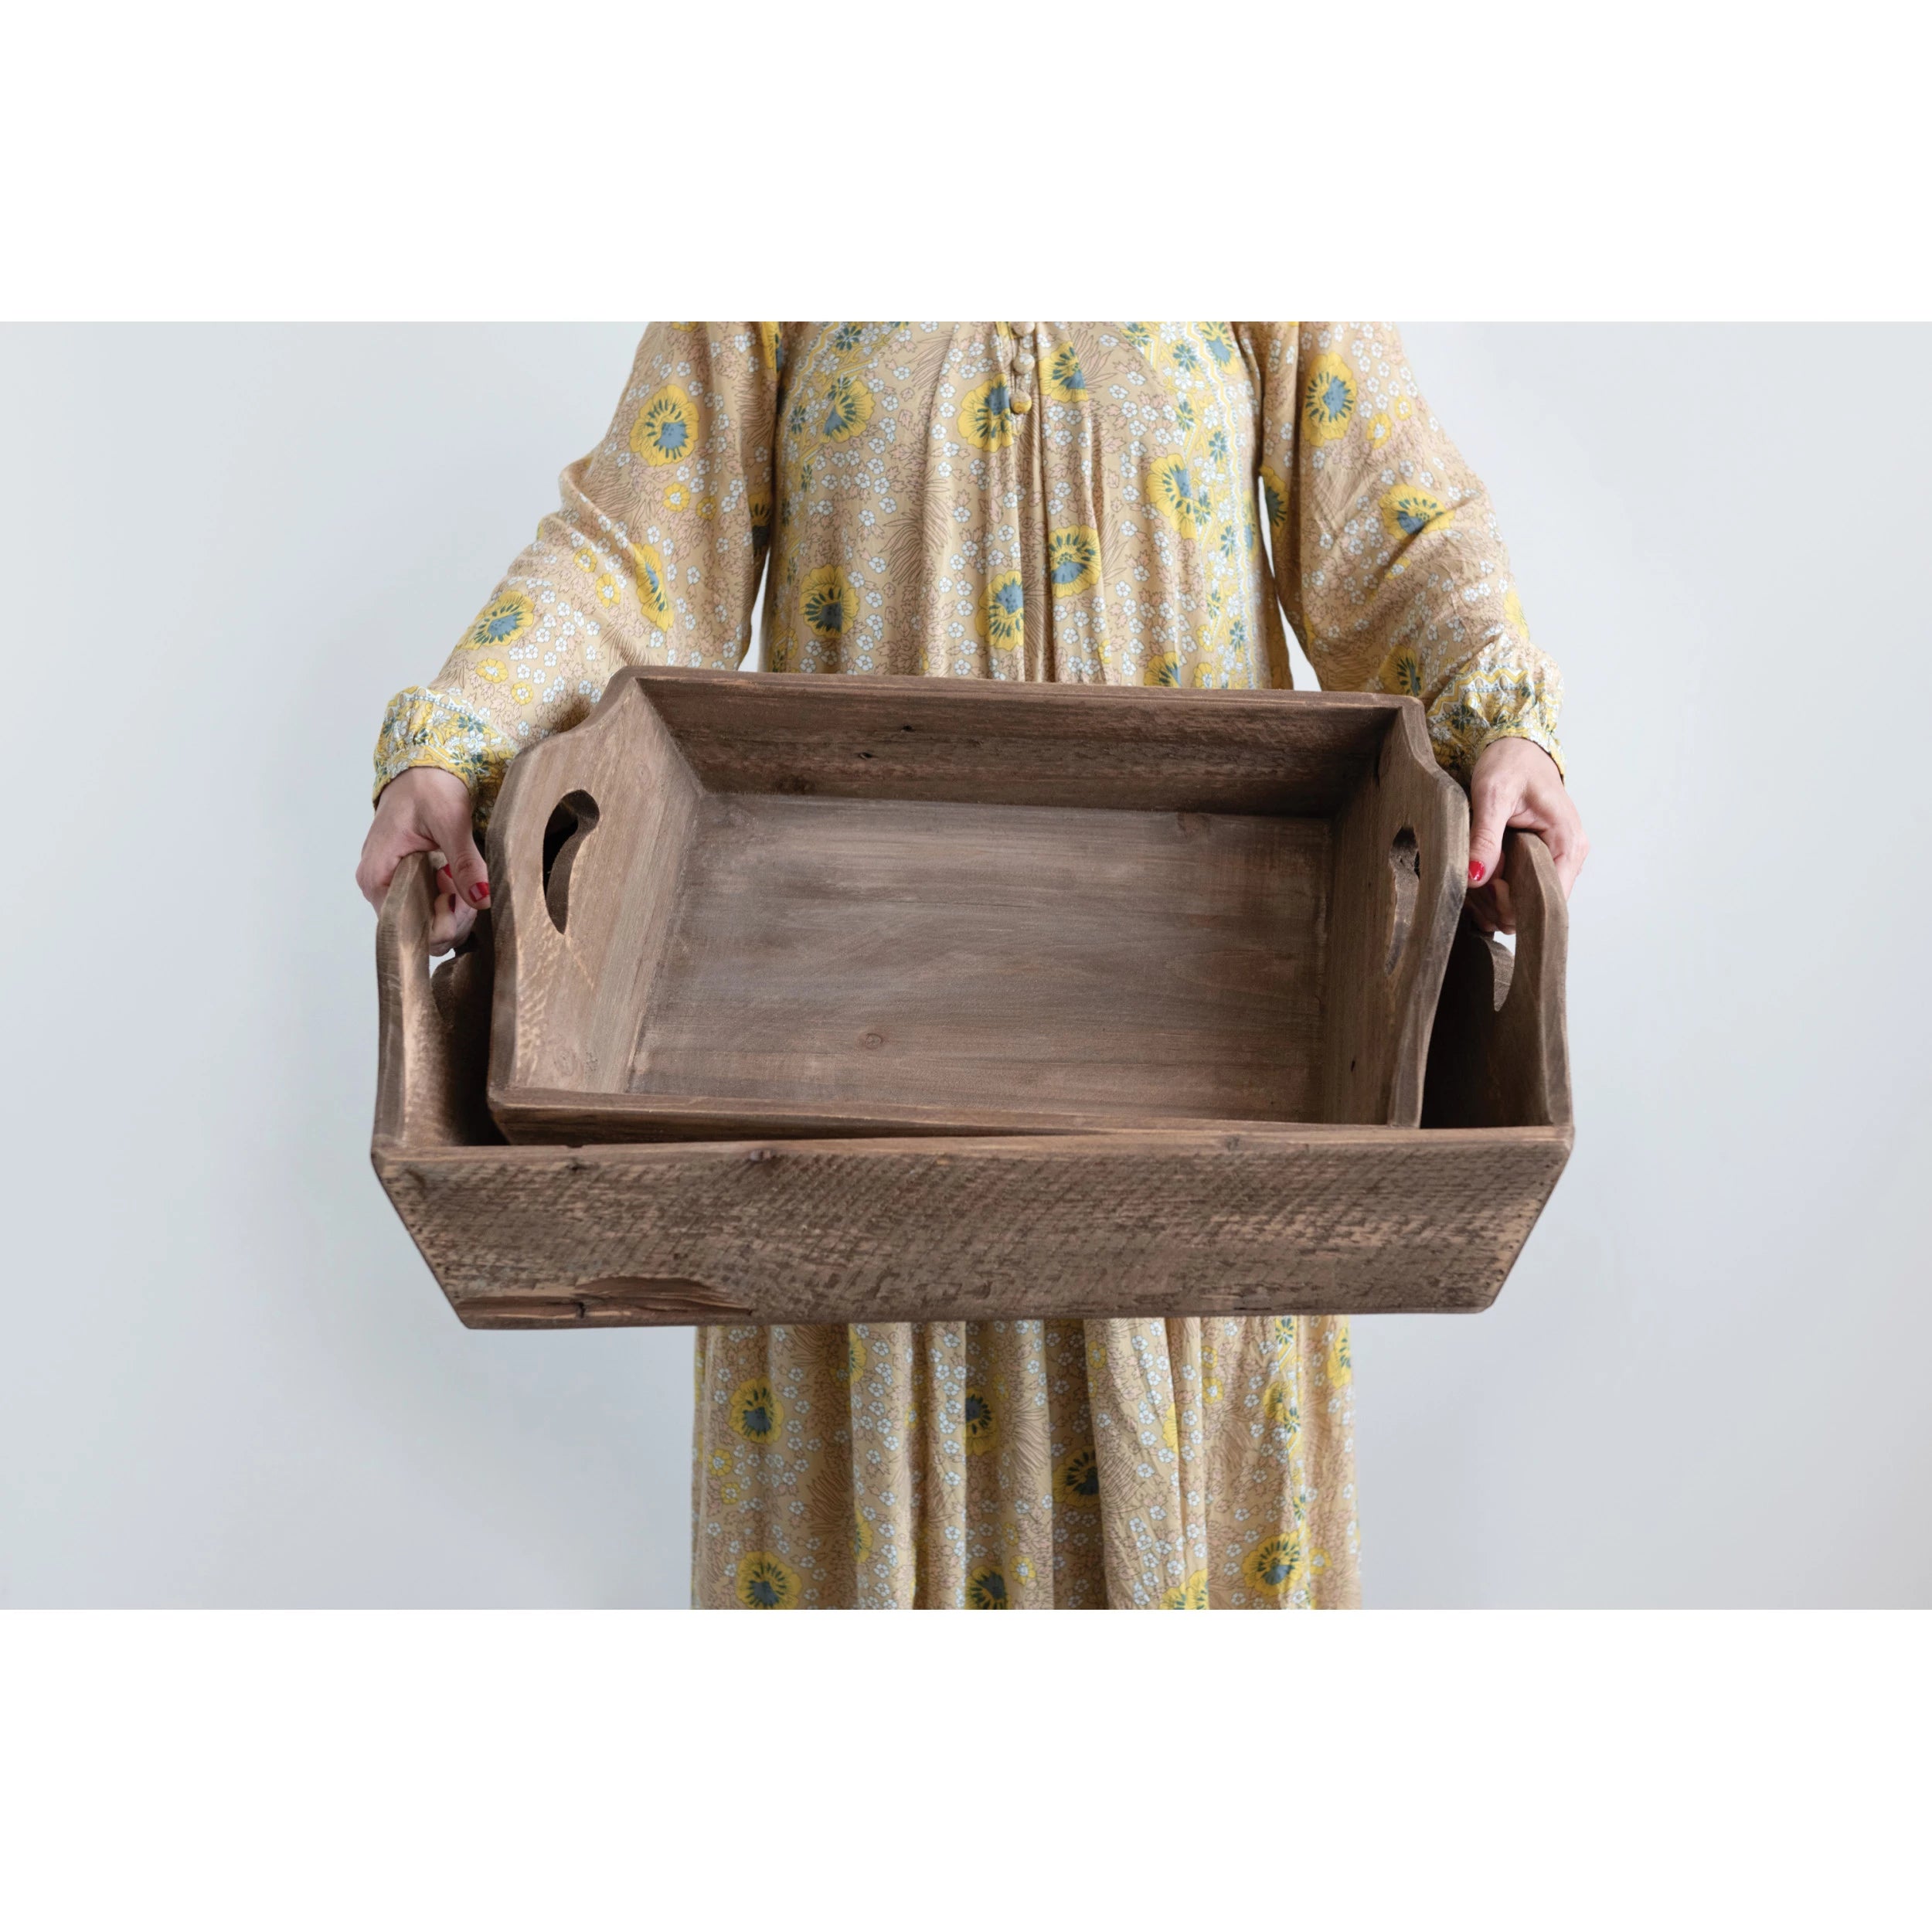 Decorative Wood Trays with Handles, 2 Sizes